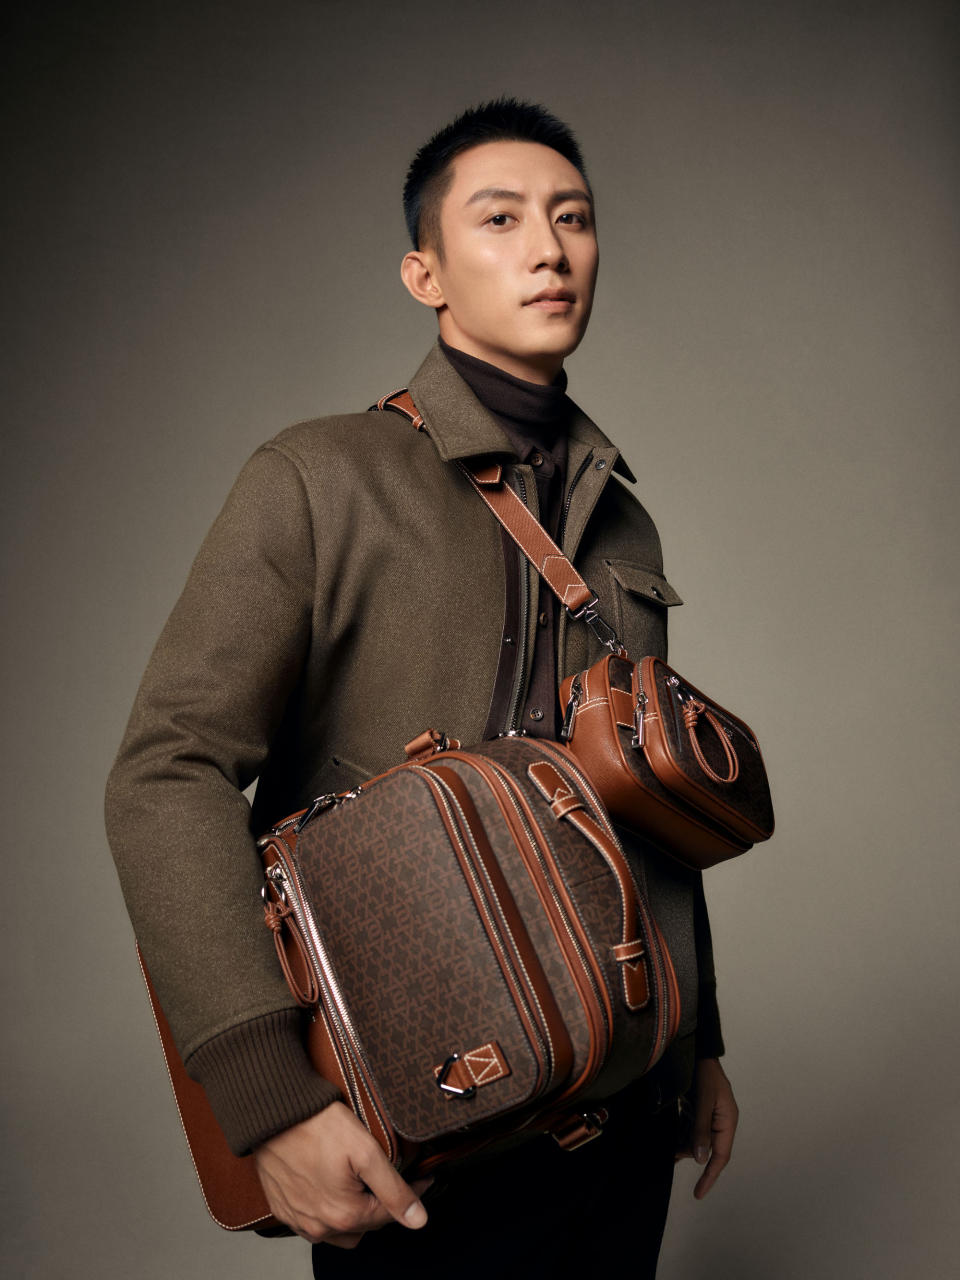 The Bally fall 2021 ad campaign starring Johnny Huang. - Credit: Courtesy of Bally